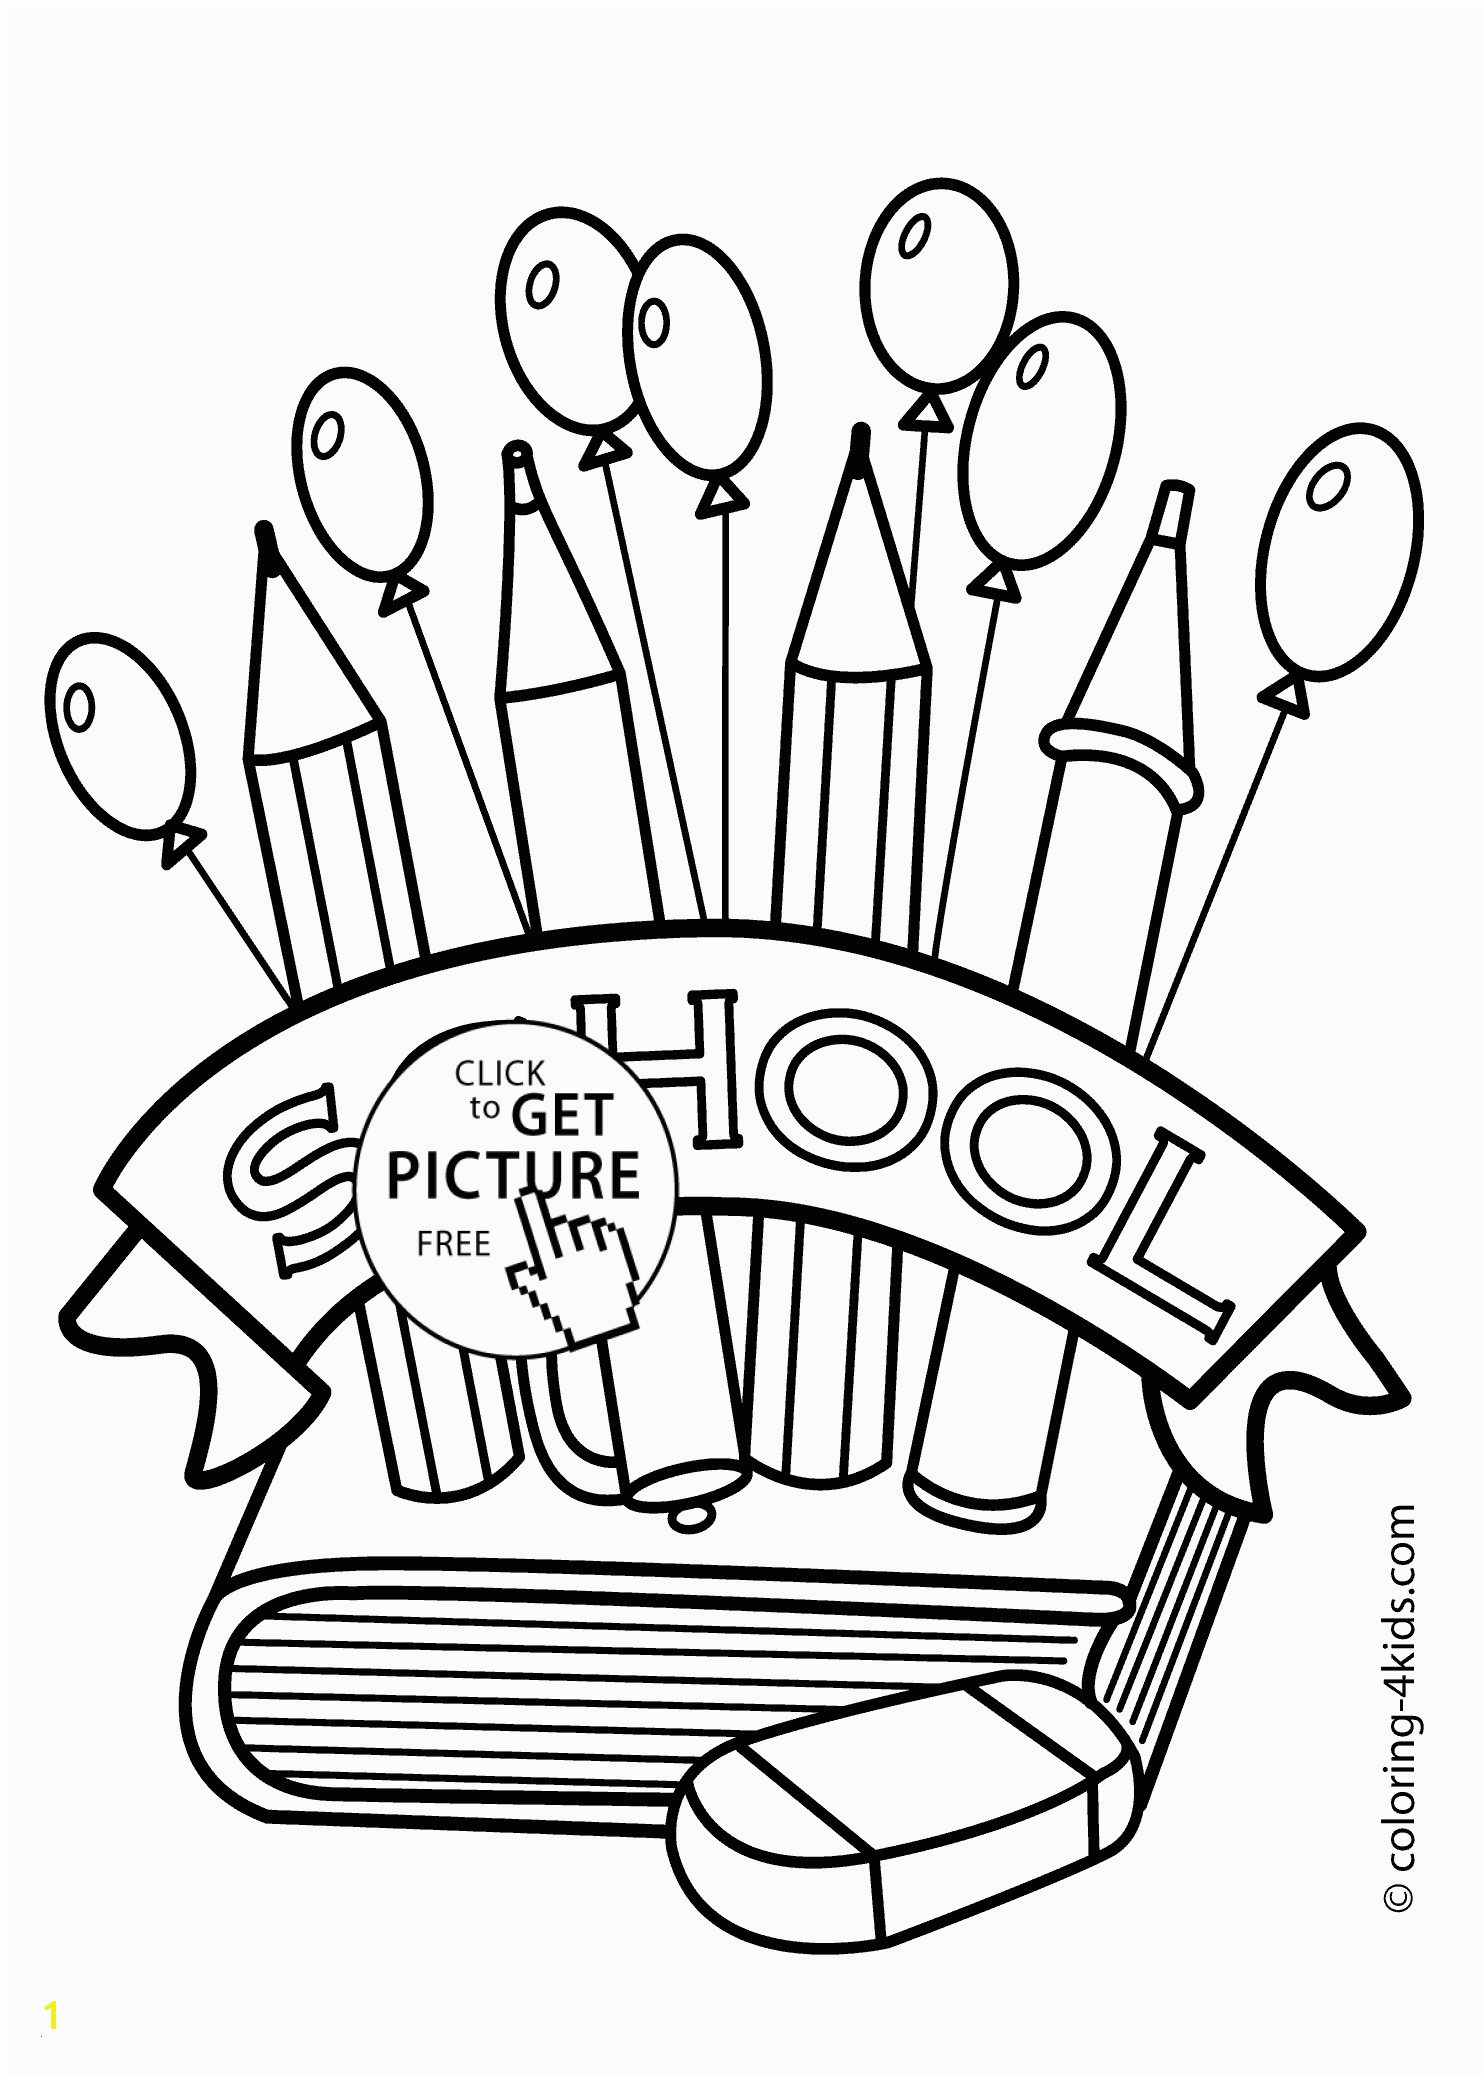 School Supplies Coloring Pages Printables Best Lovable First Day School Coloring Pages for Kindergarten Pics